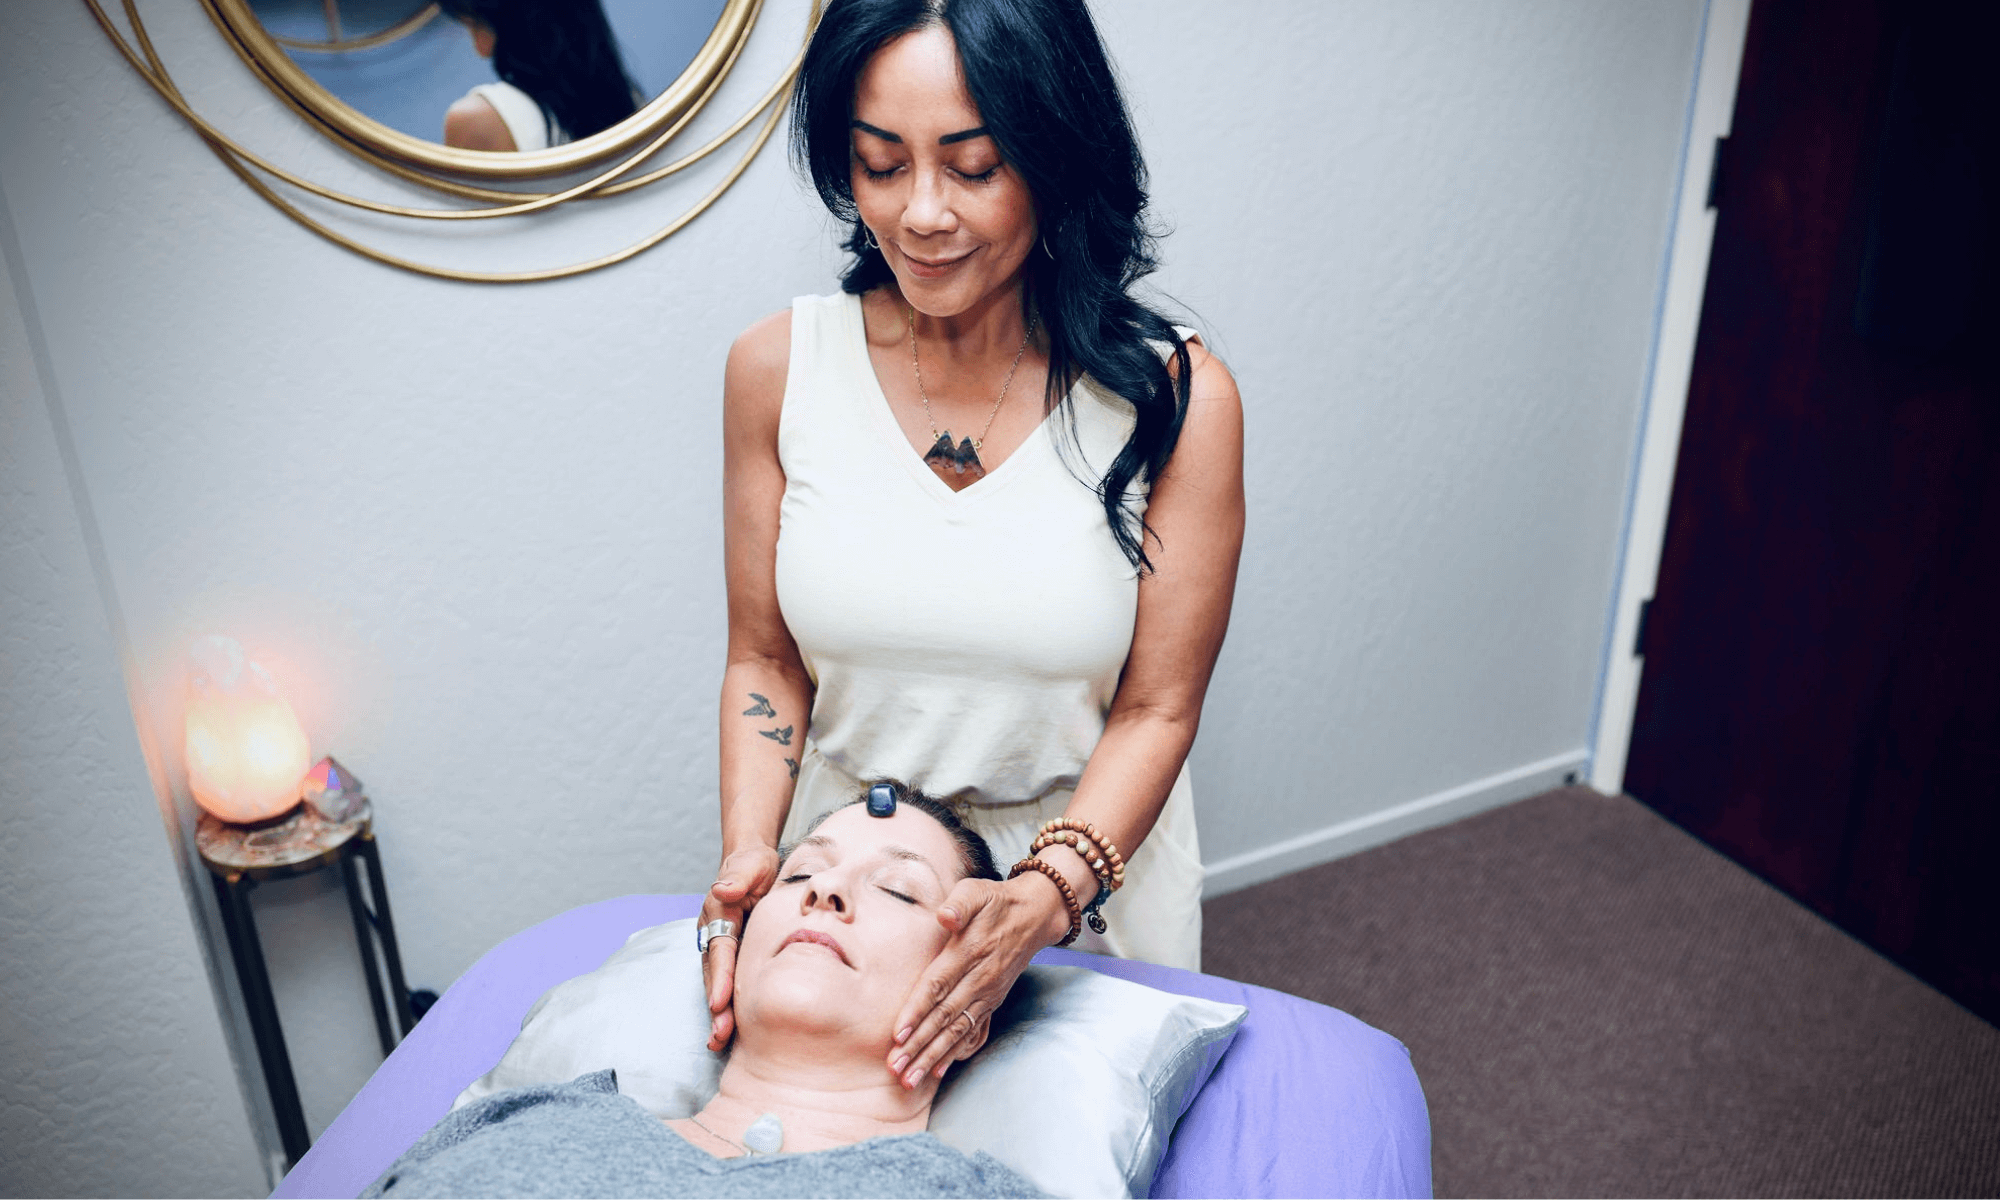 A beautiful woman with long dark hair and tan skin, Deanna Jaromay, practicing Reiki, energy work, with her hands on the temples of another woman laying on a table.